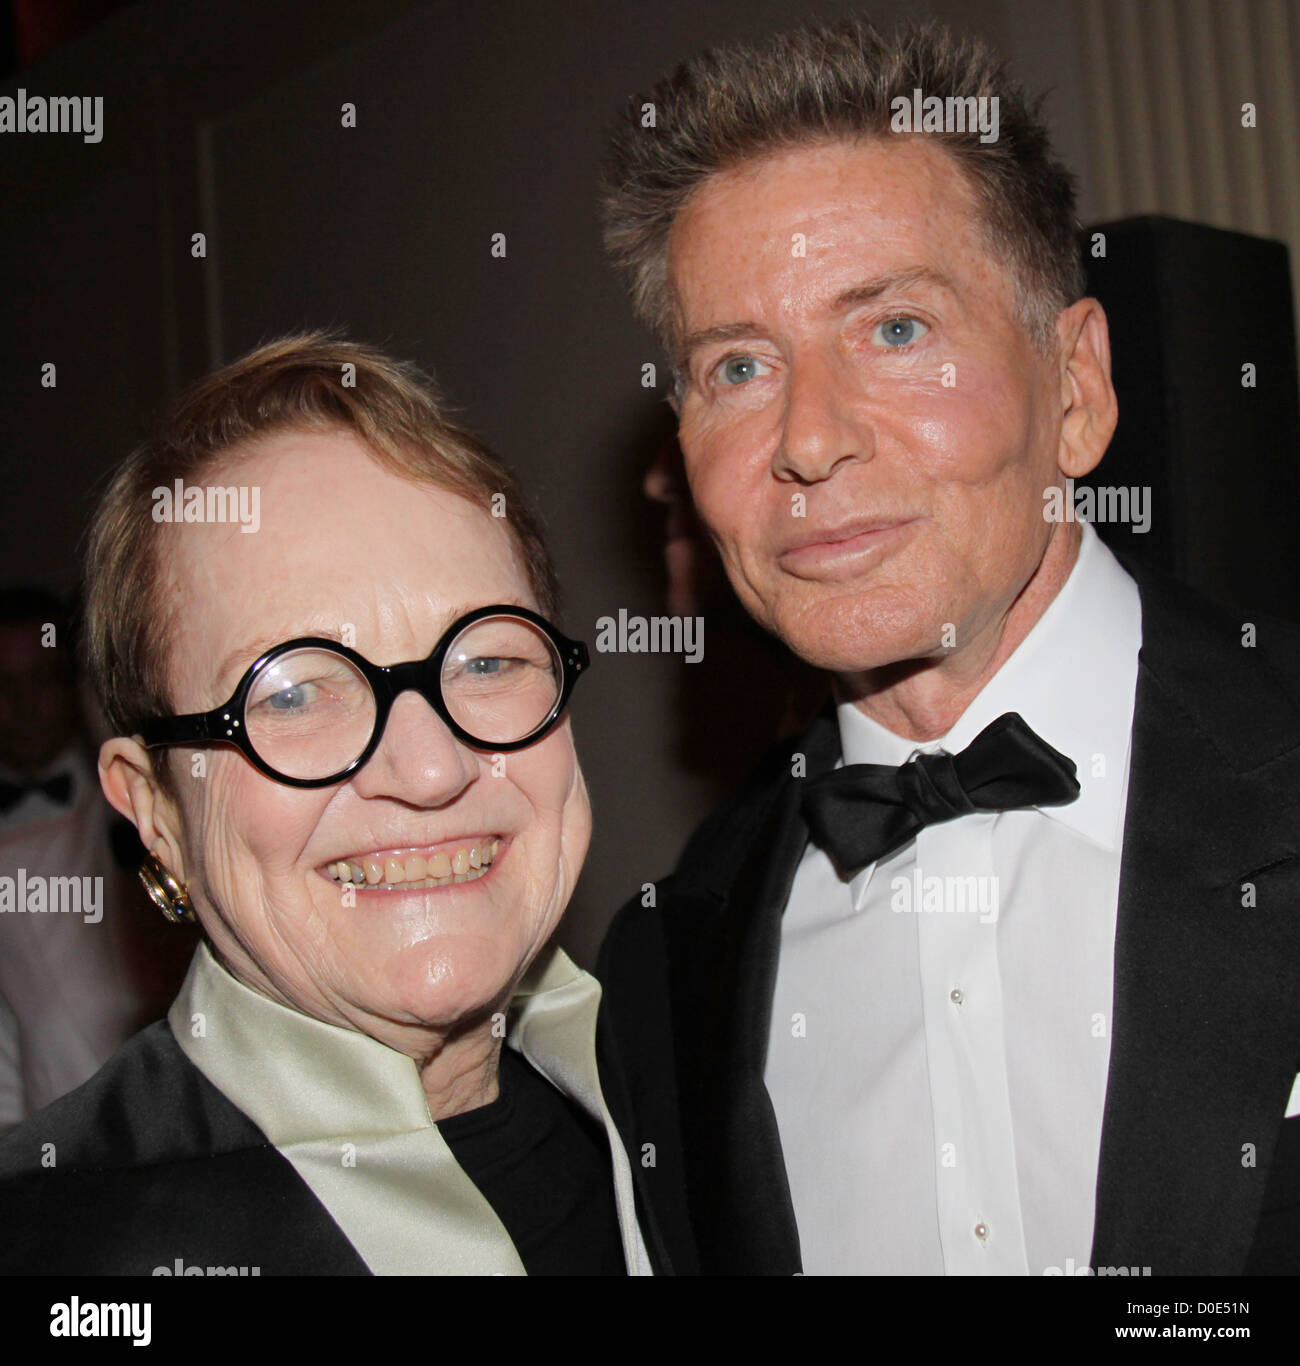 Calvin Klein and Mary Lu 27th Annual Night of Stars 'The Globalists' held  at Cipriani 55 Wall Street New York City, Thursday Stock Photo - Alamy